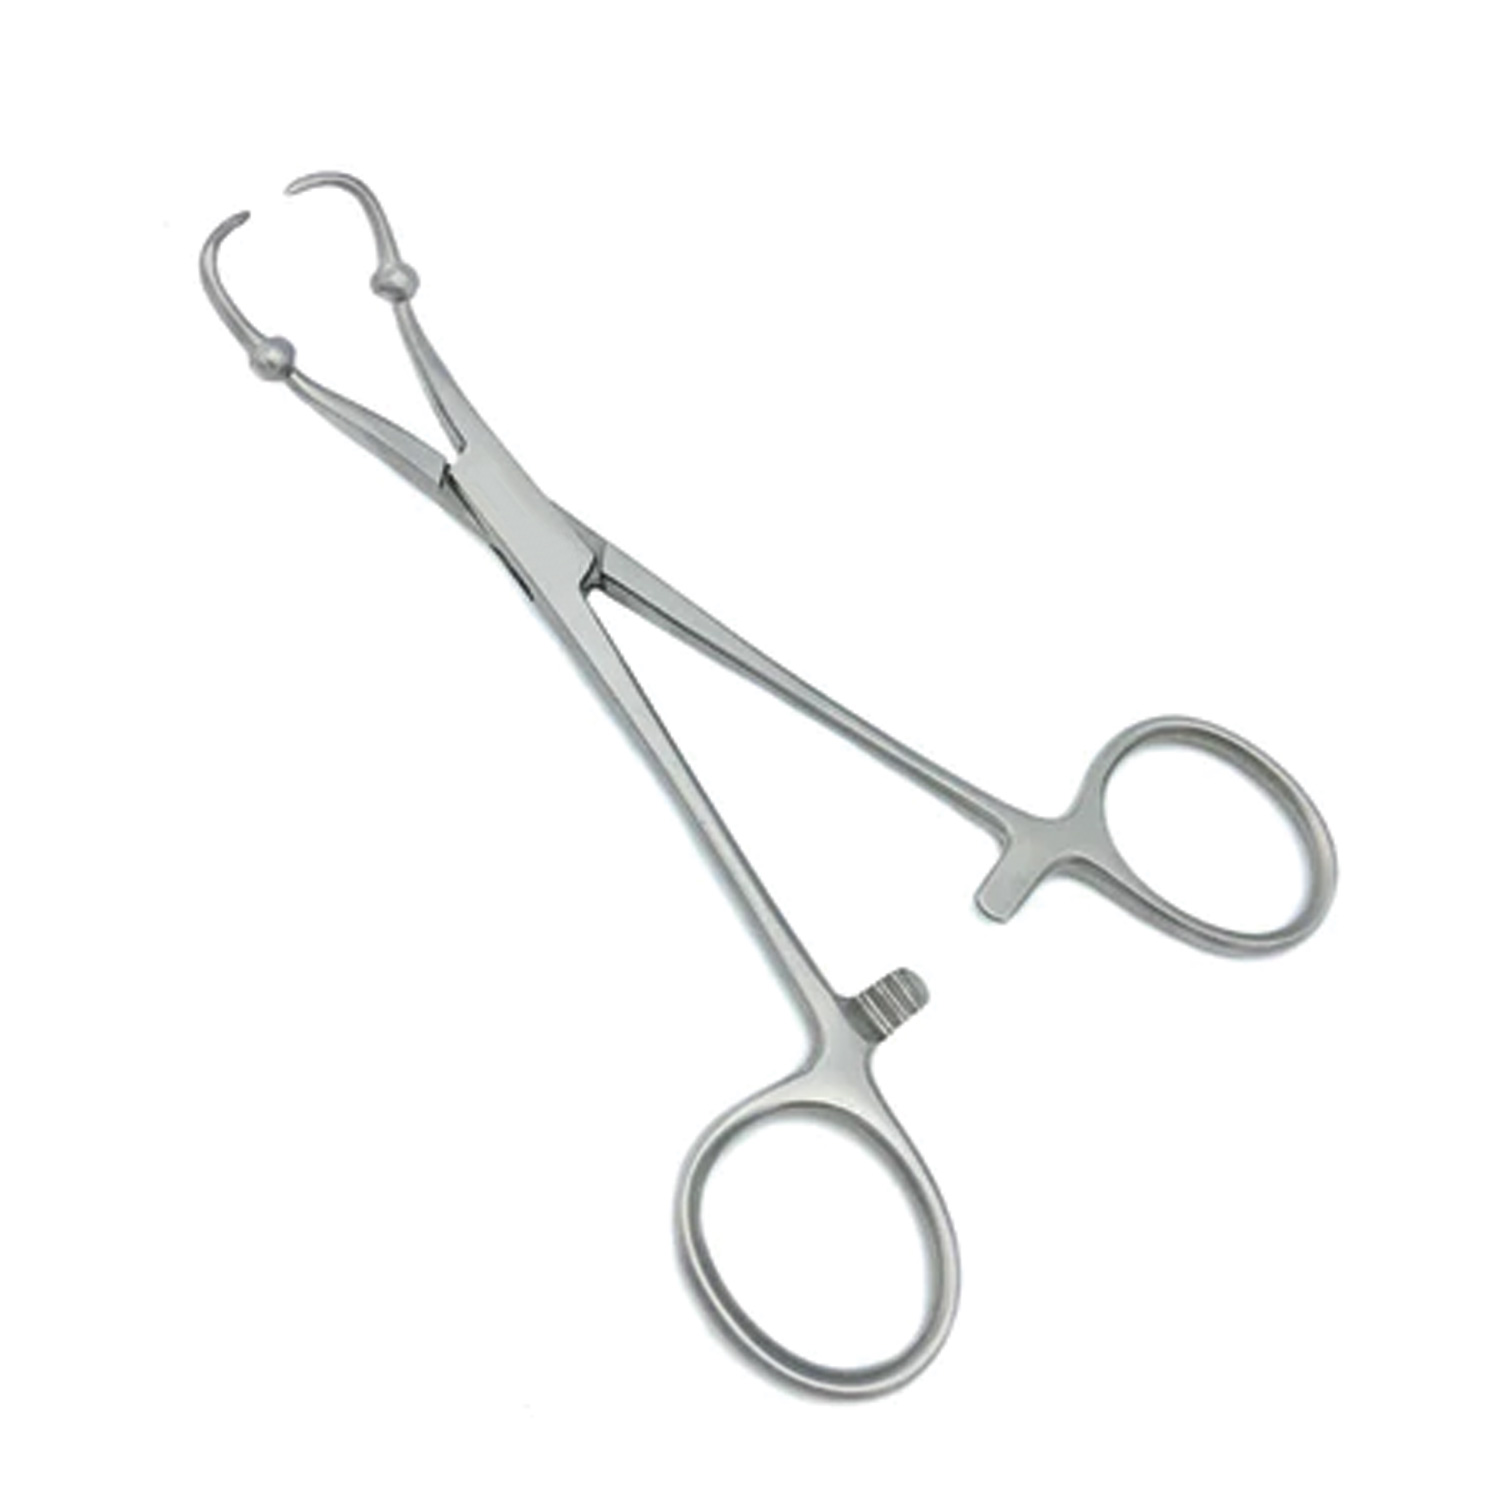 ACE Backhaus Roeder Towel Clamp with Ball Stops-Economy